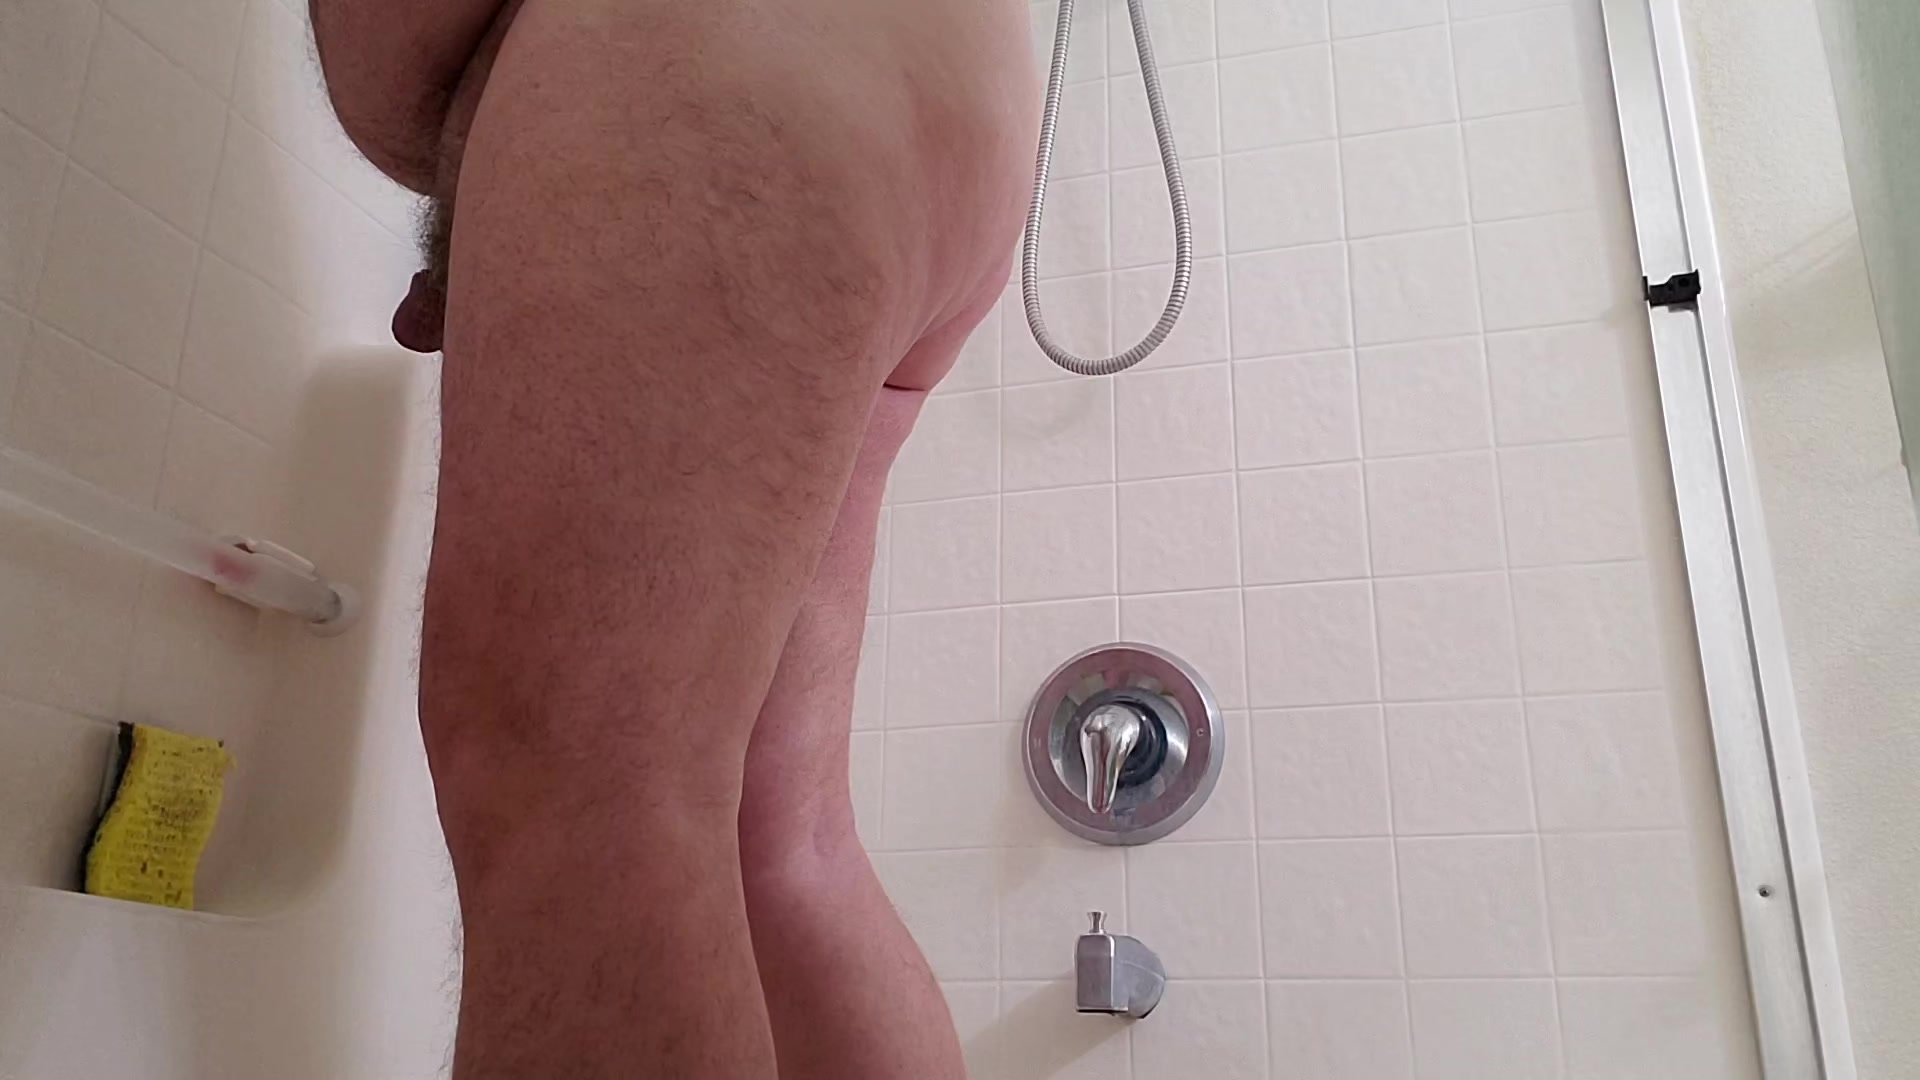 Poop and Play 32 - Showering (Camera 2) - Part 1 of 2